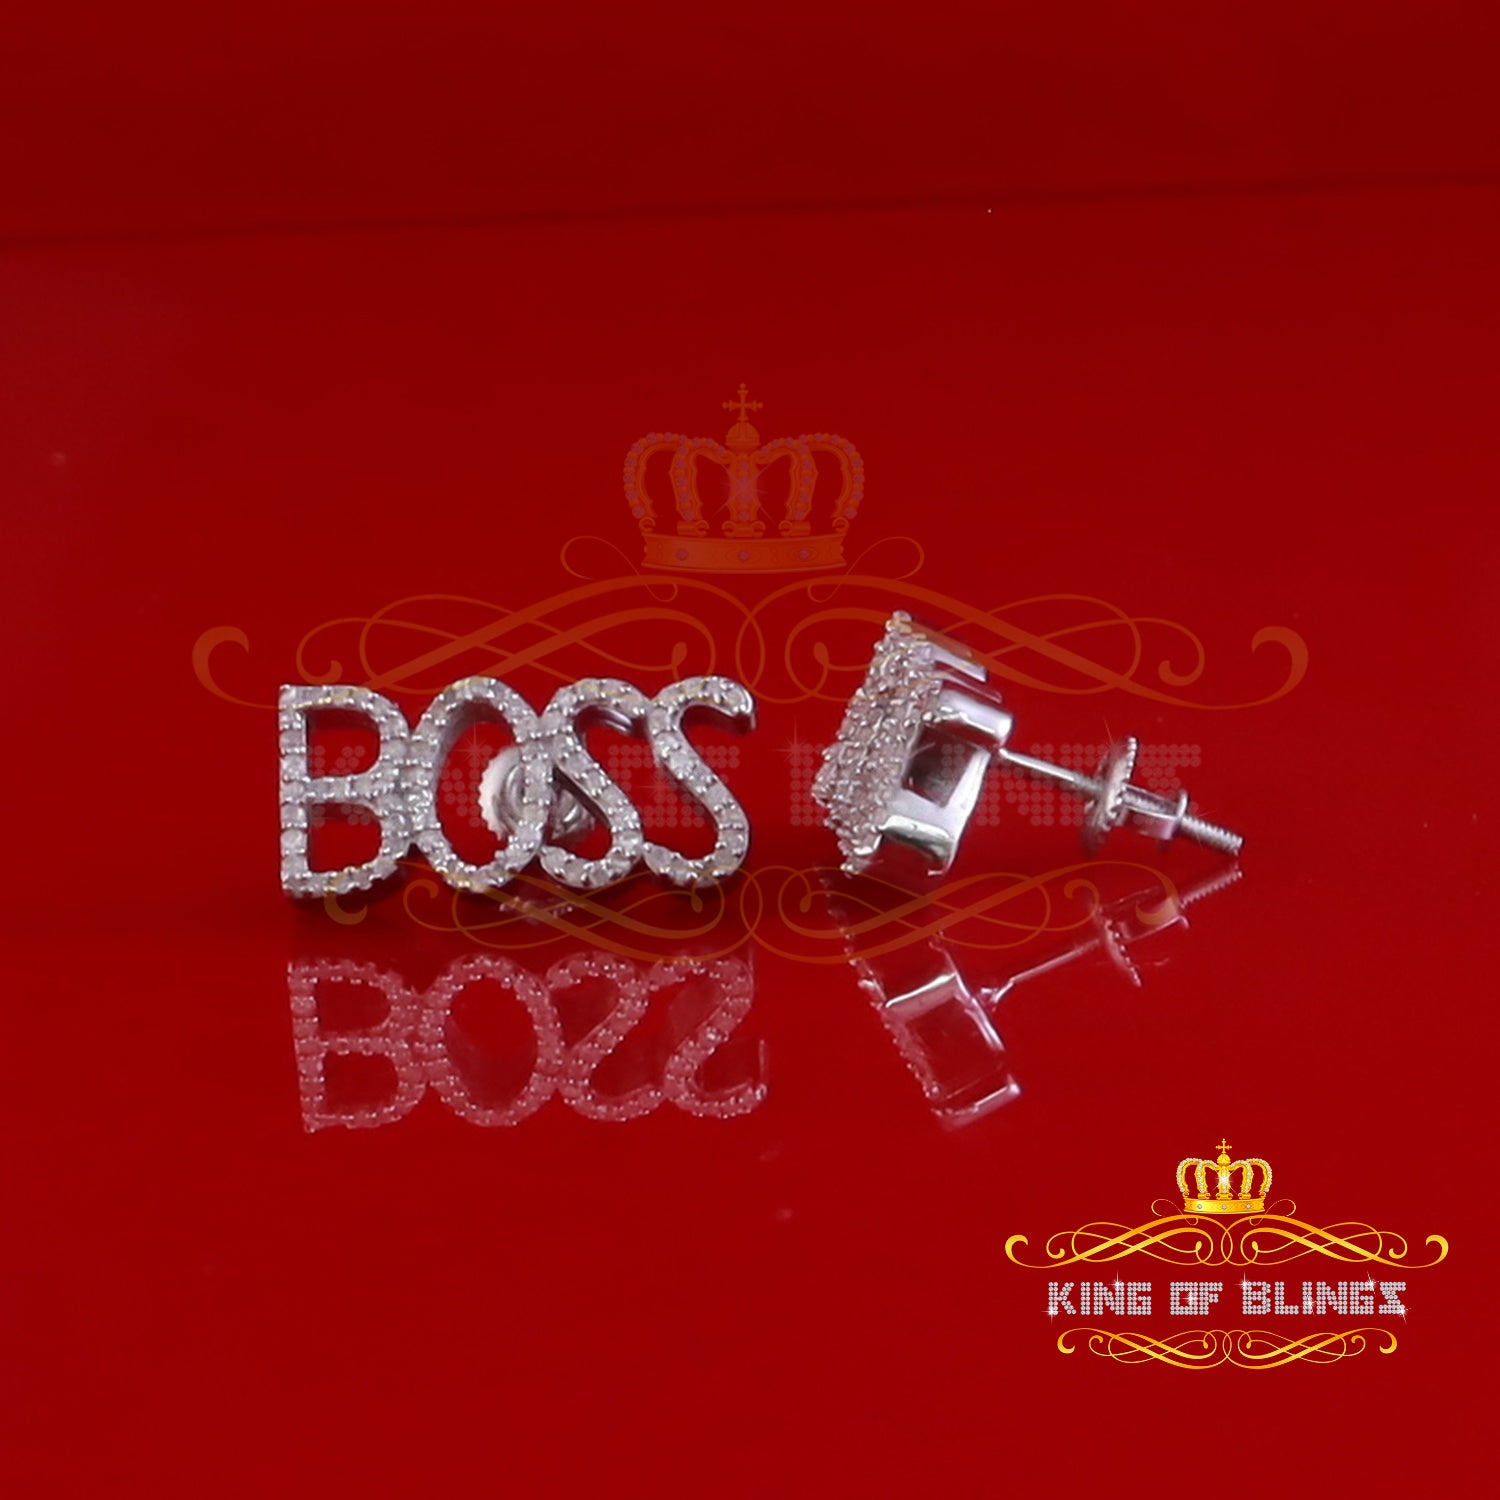 King Of Bling's BOSS Women's Stud Earrings with 0.33 Ct Natural Diamonds in White 925 Silver KING OF BLINGS